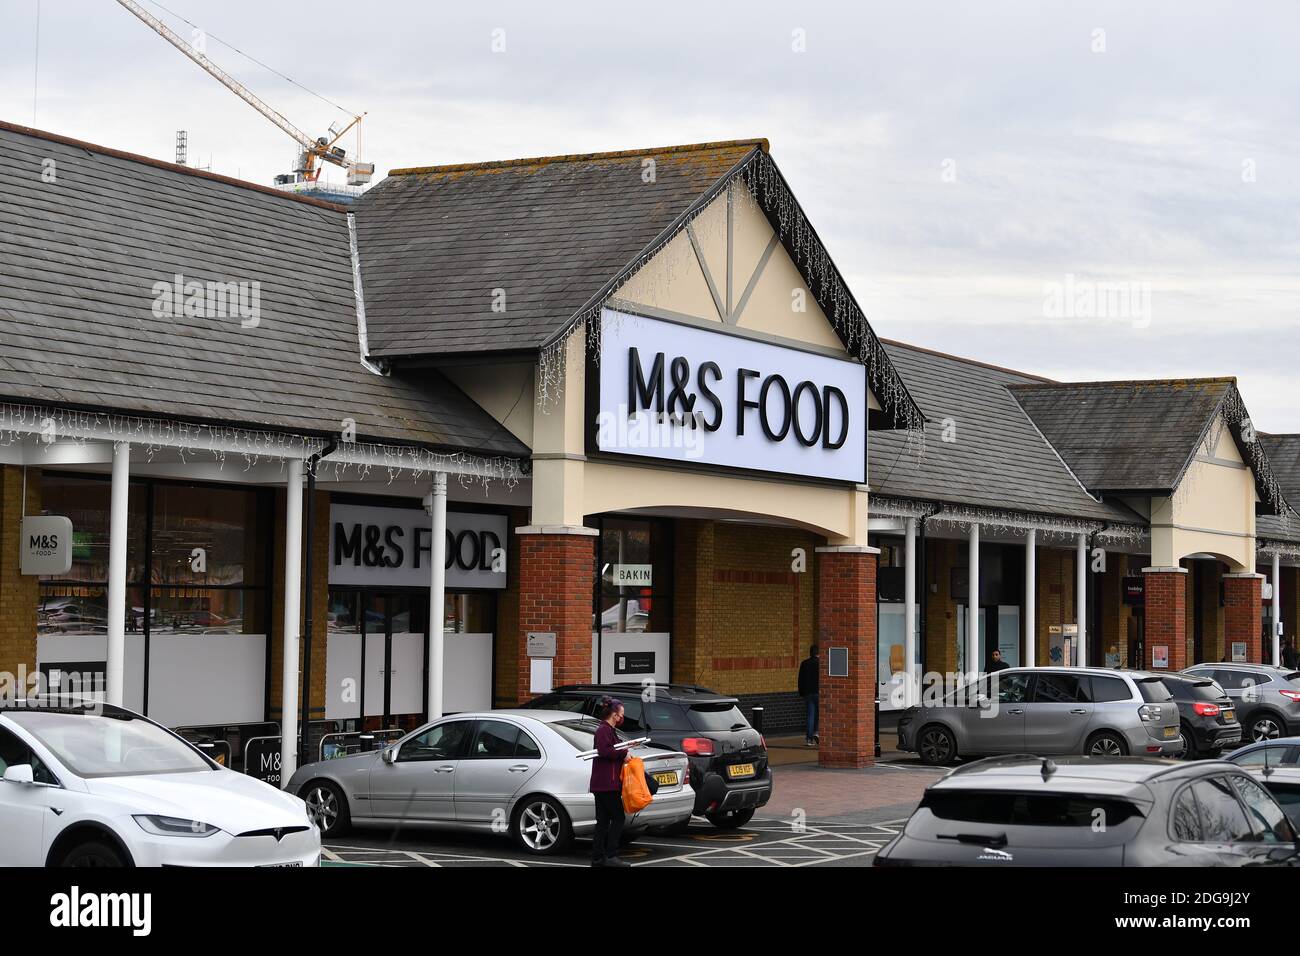 Marks & Spencer M&S Food Shop in Two Rivers, Staines, Surrey, Donnerstag, 2. Dezember 2020. Stockfoto